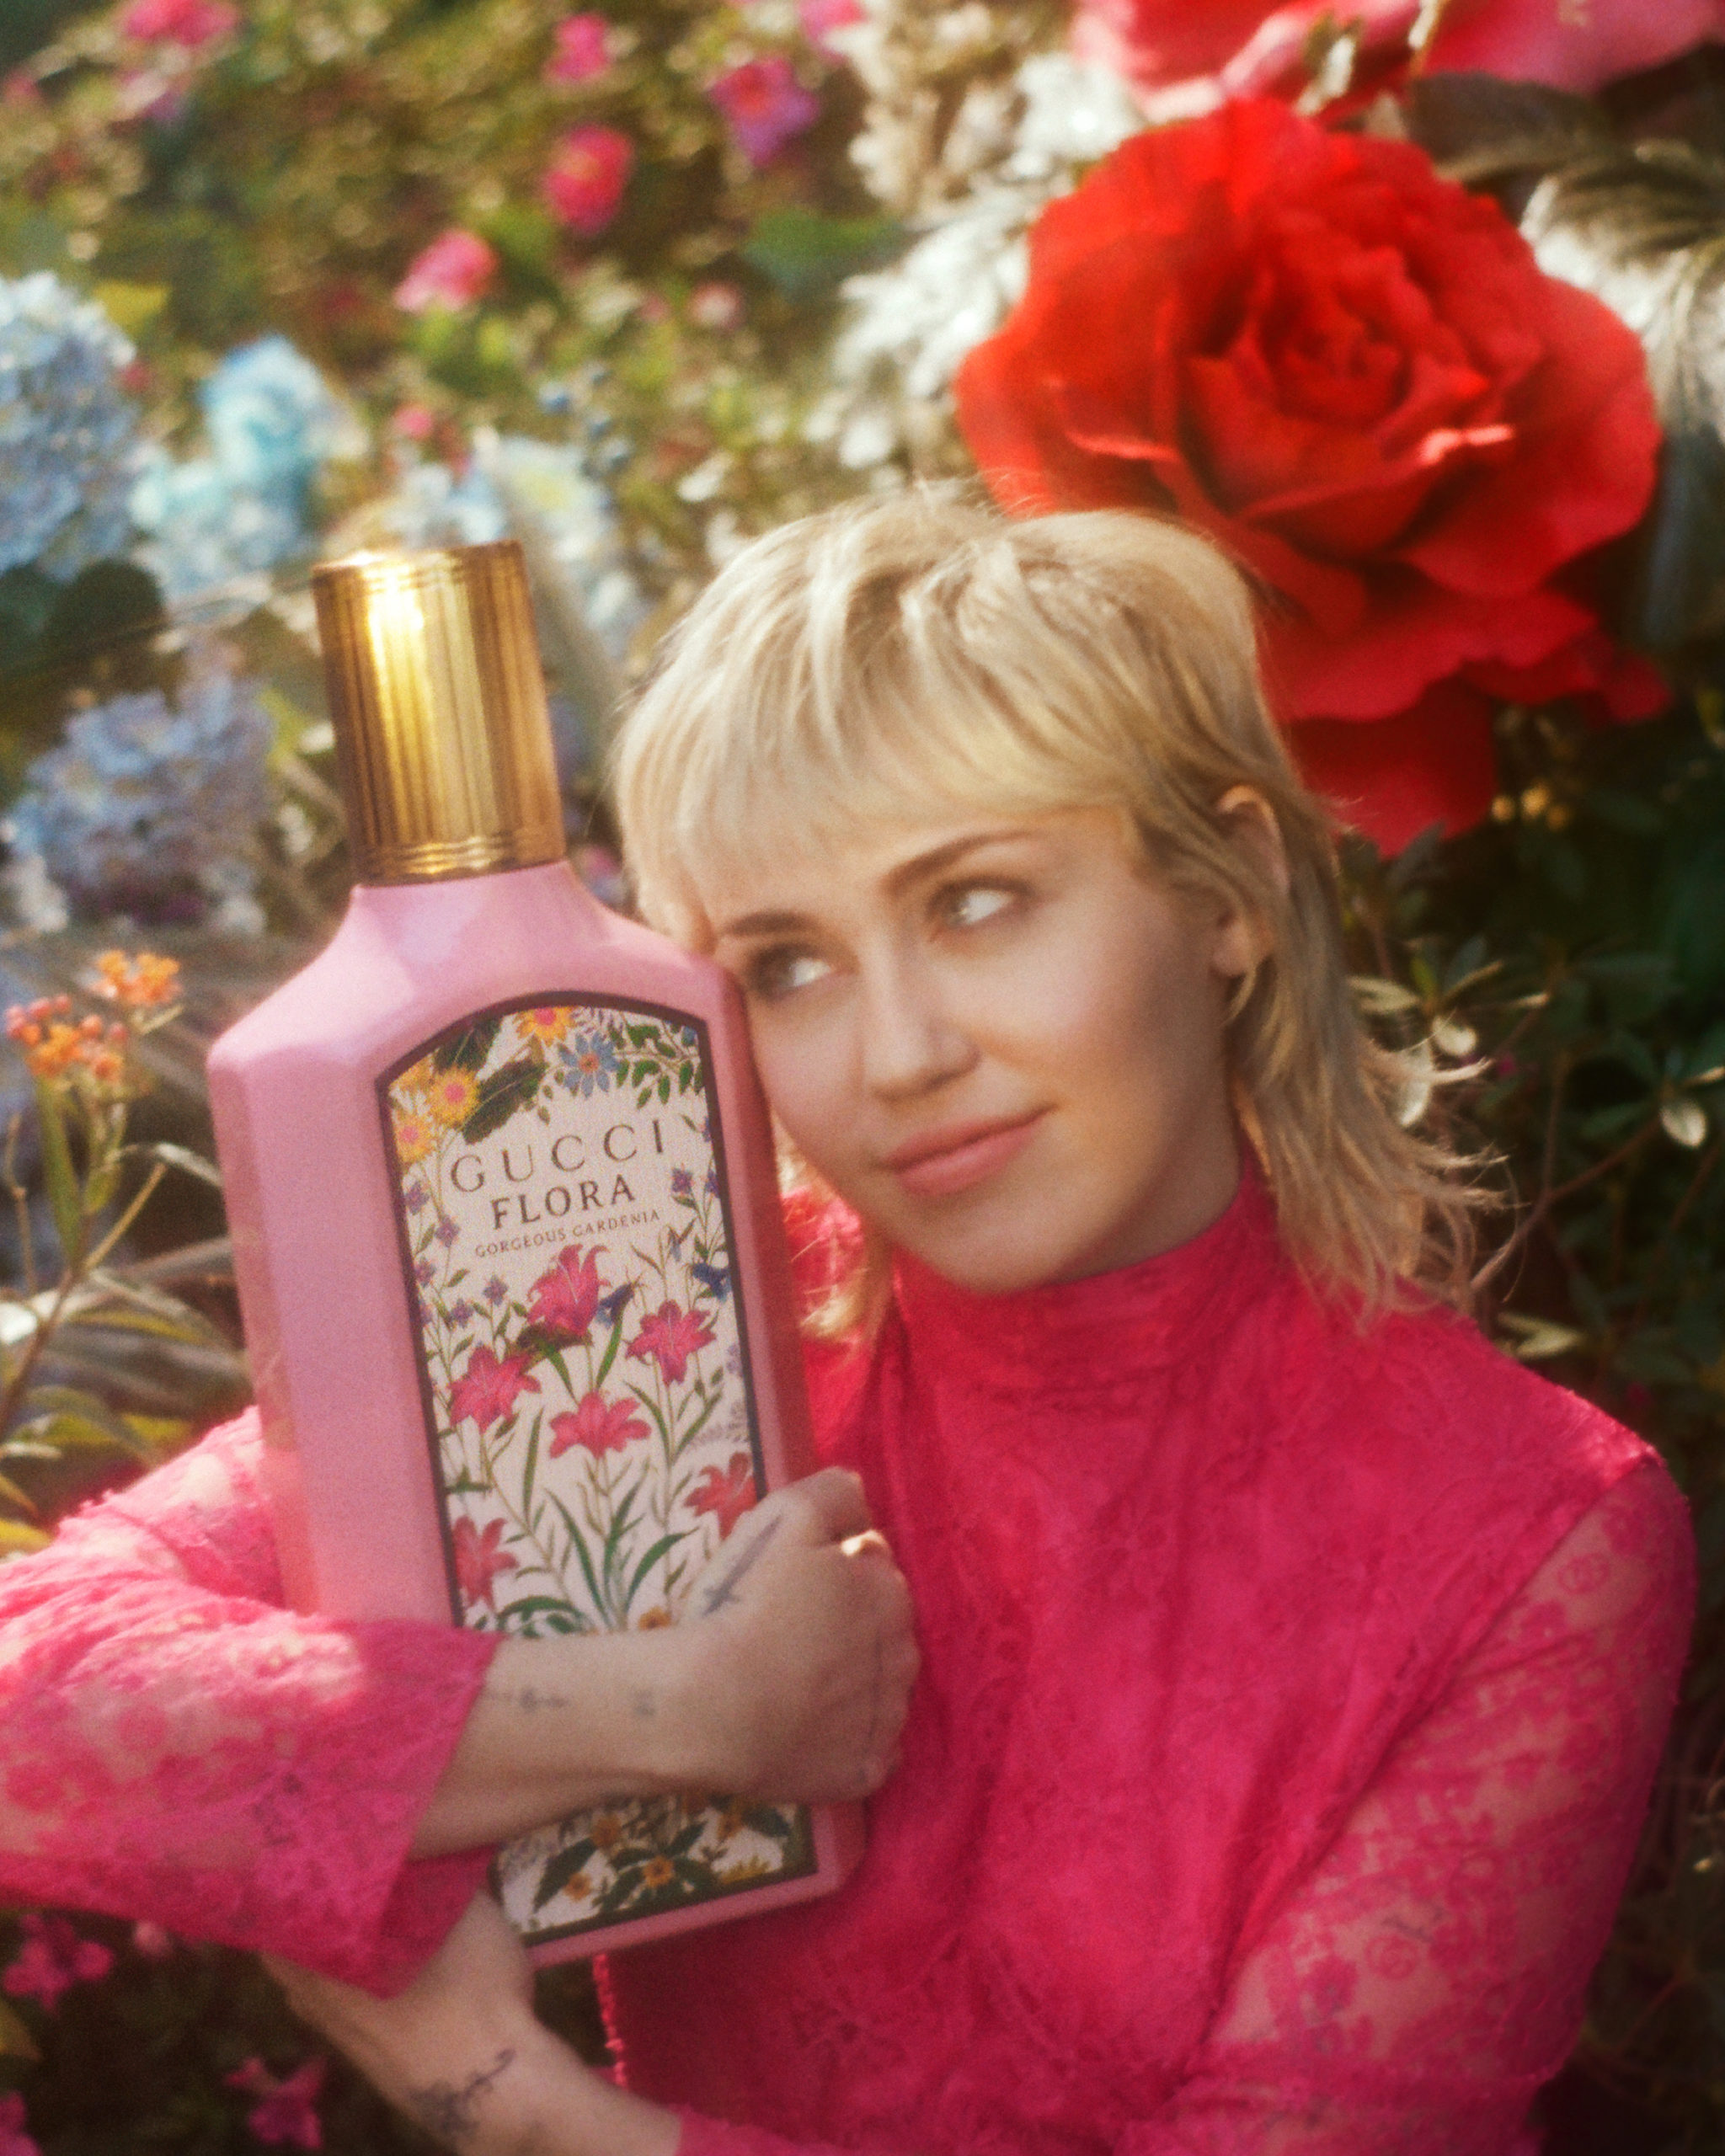 Pat Superioriteit Nuchter Petra Collins on Her Gucci Flora Mood Board and Working With Miley